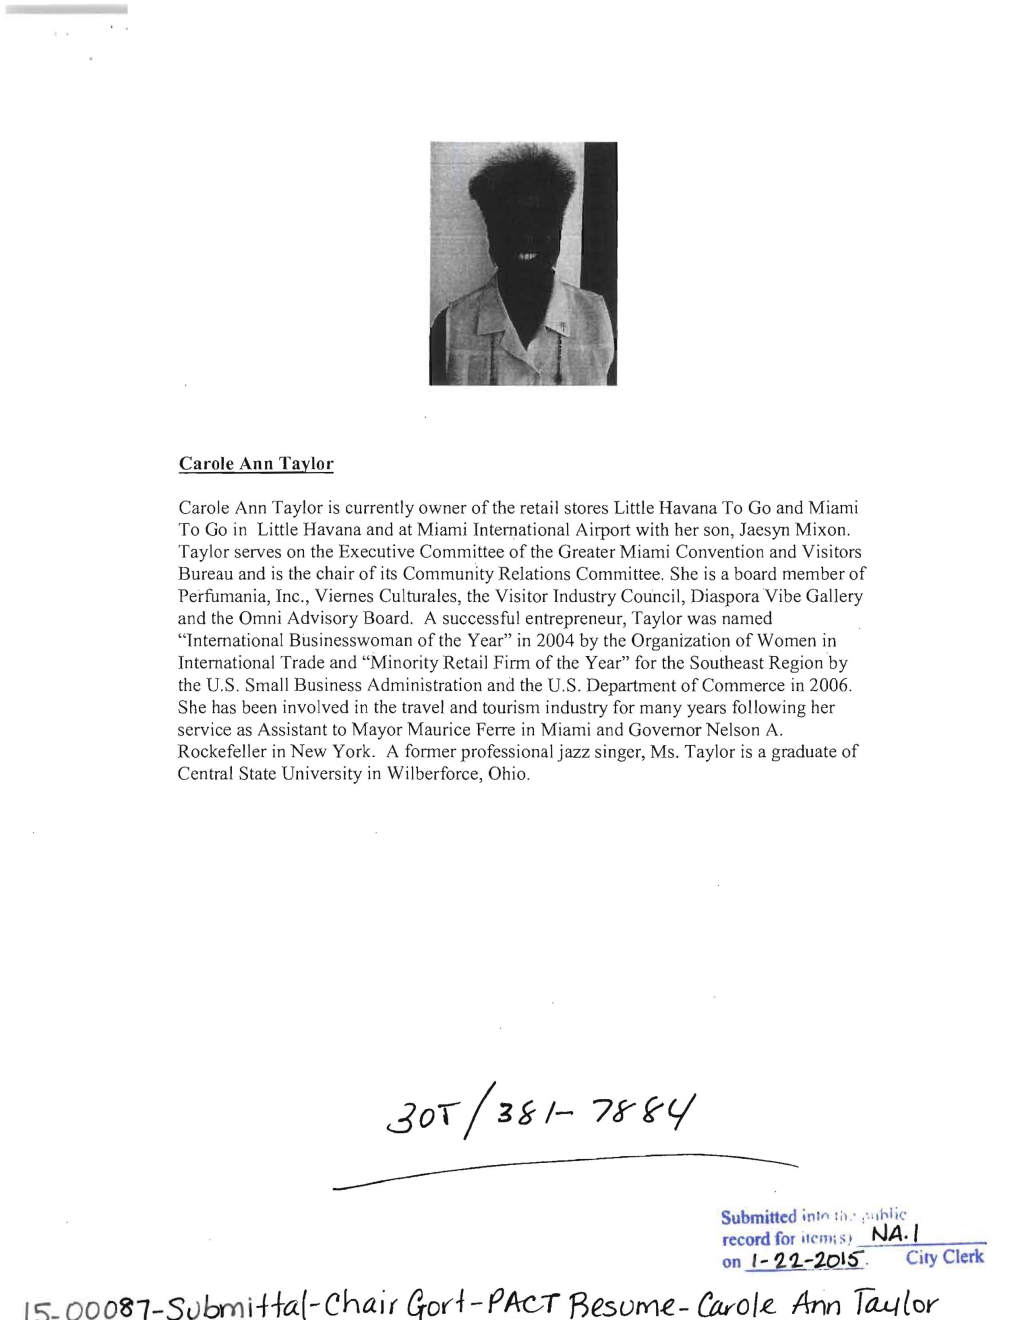 15-00087-Submittal-Chair Gort-PACT Resume-Carole Ann Taylor.Pdf